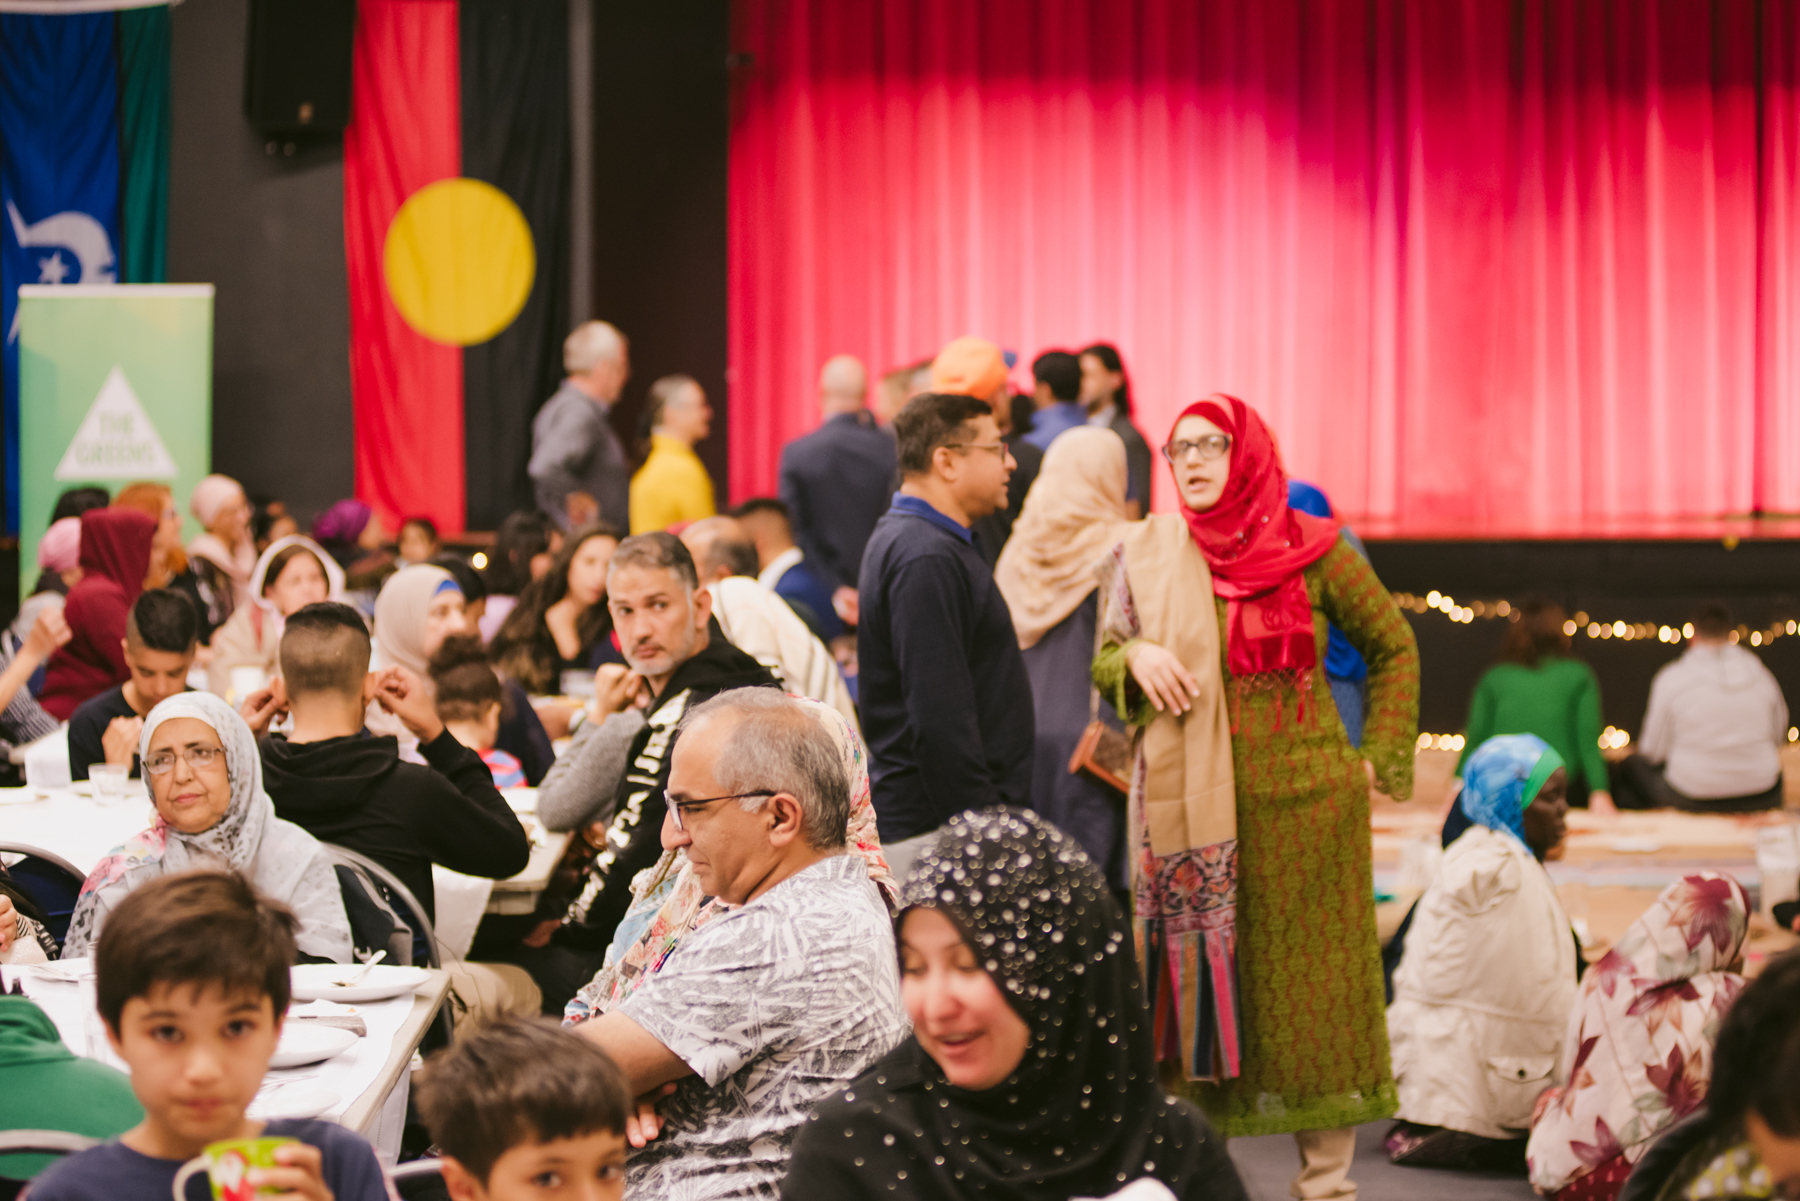 A Community Iftar Dinner thrown by the Australian Greens in May, 2019.